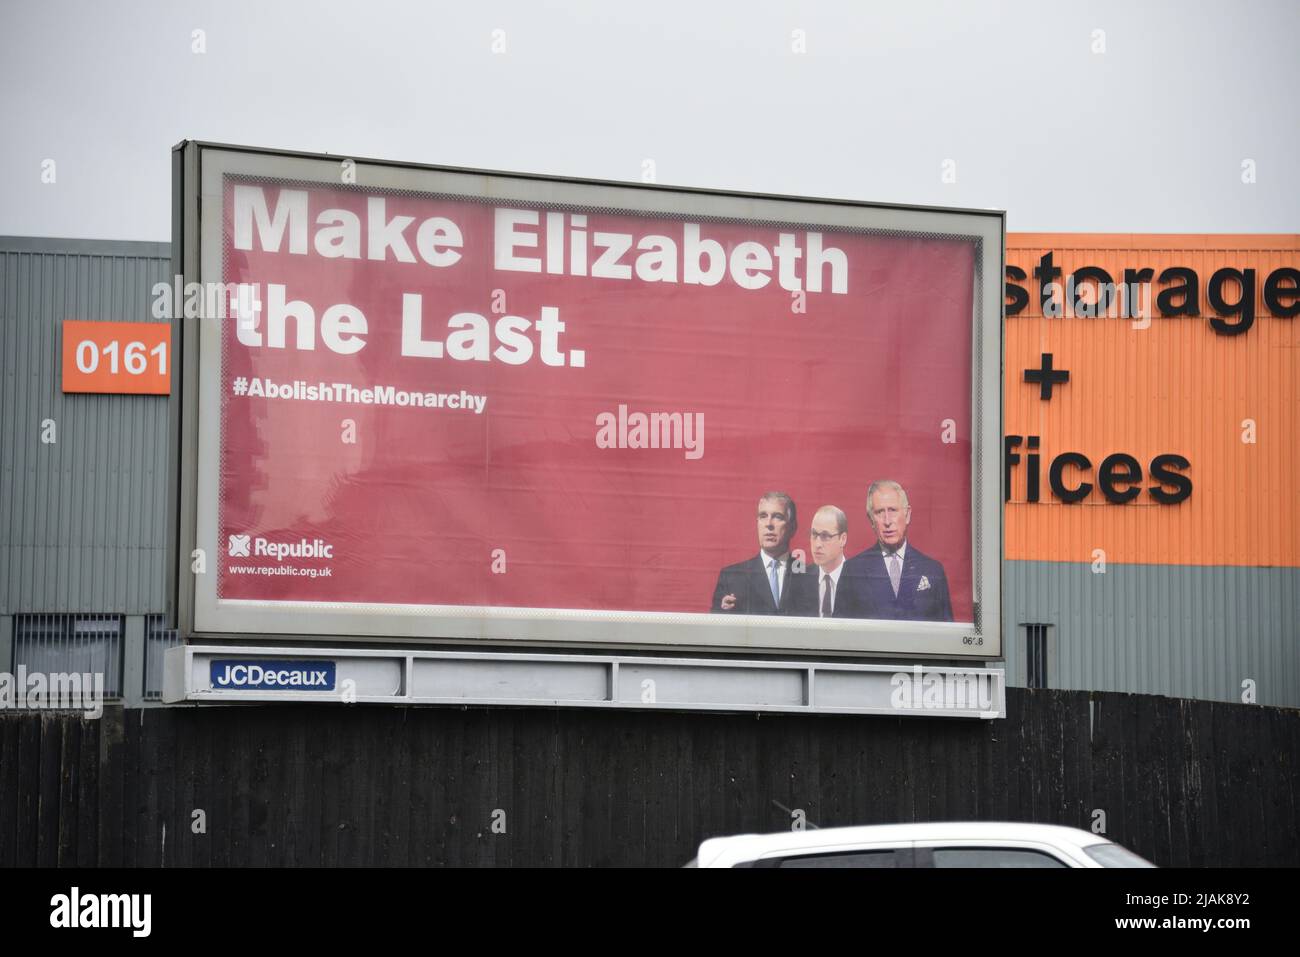 Manchester, UK, 31st May, 2022. 'Make Elizabeth the Last. Abolish the Monarchy' advertising billboard appears in Manchester, England, UK, in the run up to the Platinum Jubilee. Media report billboard organisers Republic saying: 'Recent polls now show more than one in four want the monarchy abolished, while support has dropped from 75% to 60%. Ten years ago, around 10,000 street parties were registered for the jubilee. This time, it's just 1,700.' The same poster has appeared in other UK cities, produced after crowfunding money to carry out the campaign. Credit: Terry Waller/Alamy Live News Stock Photo